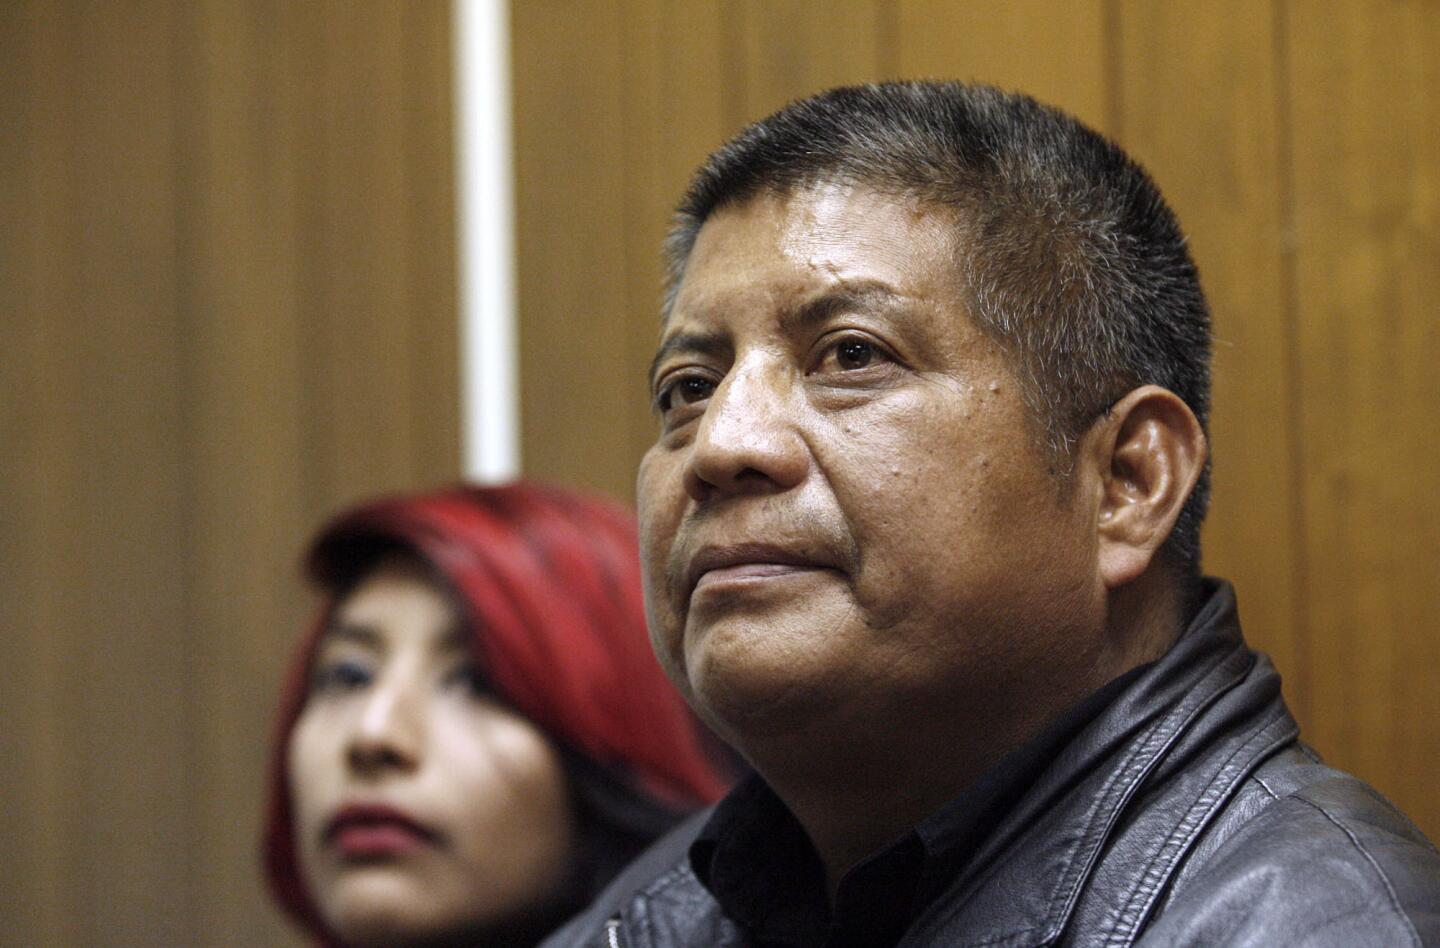 With his 16-yr. old daughter Elizabeth next to him, Francisco Cortez, 43 of Pasadena, listens to a question from a member of the media during press conference at the offices of Coalition for Humane Immigrant Rights of Los Angeles in Los Angeles on Wednesday evening, December 7, 2011. The electrician/handyman was returned to the USA today on humanitarian parole after he was deported November 15 to his native Mexico. Cortez had not complied with a deportation order issued in 1998. Cortez is undergoing treatment for kidney failure.